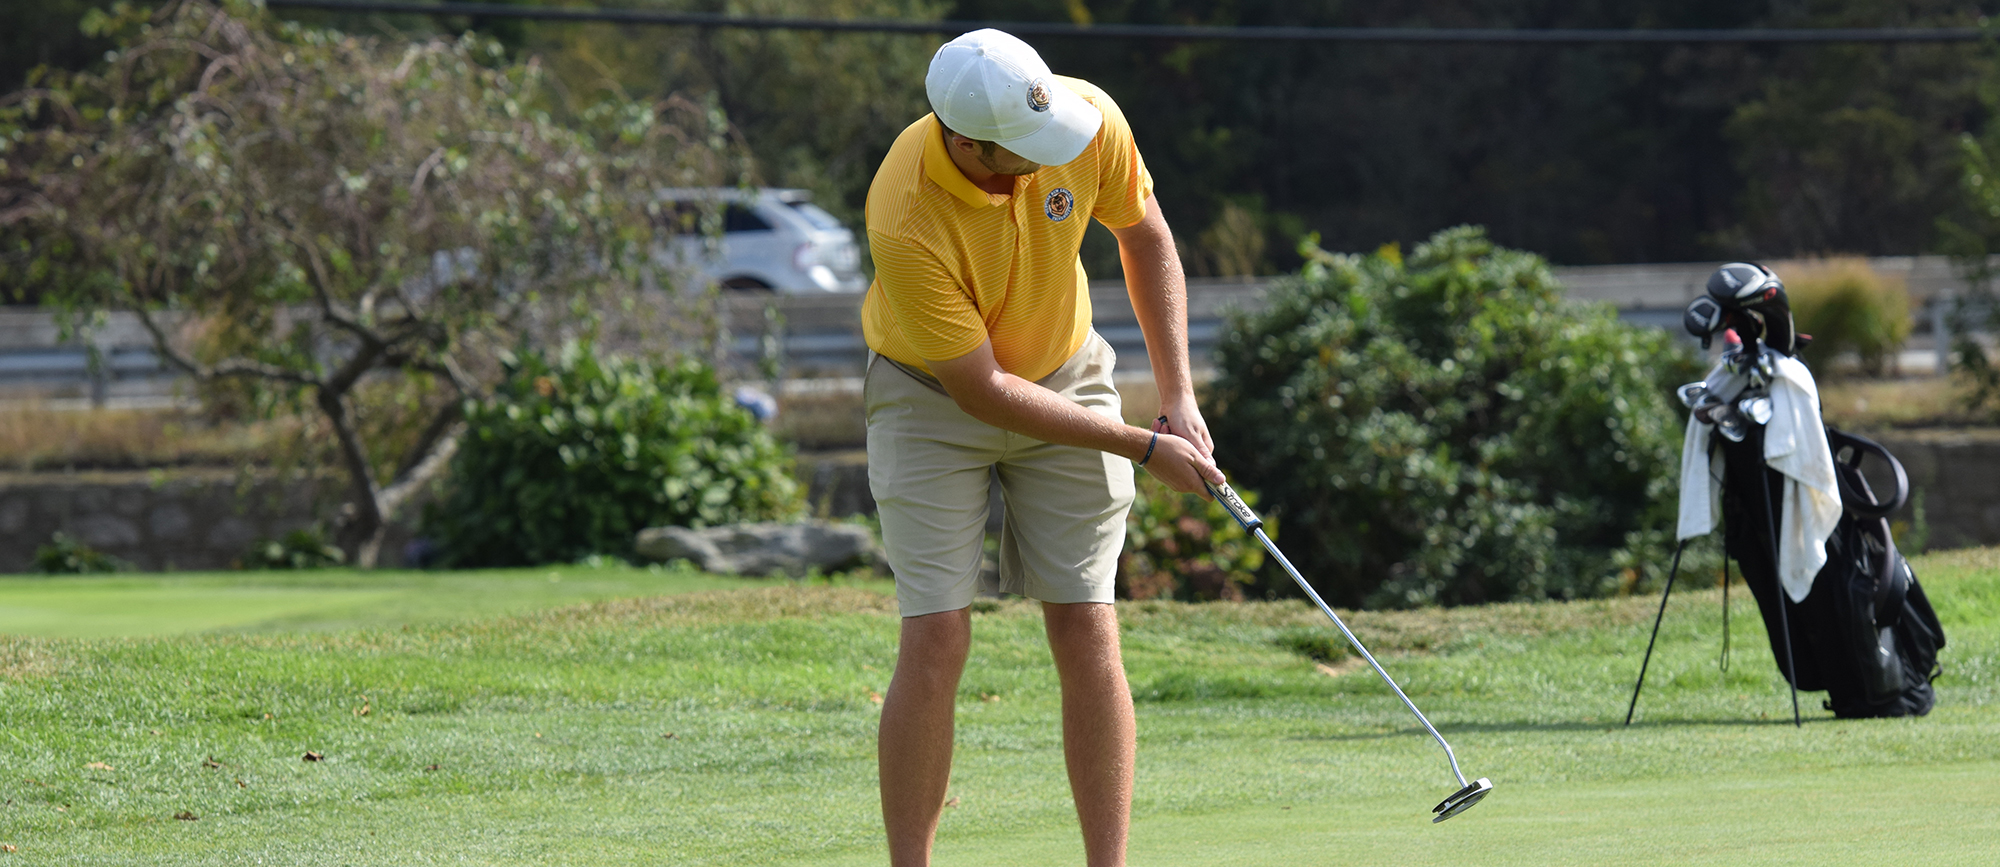 Senior Joe Ciolek leads the 20-player field at the CCC Championship with a one under par 69, and the Golden Bears hold a 14-stroke advantage following round one on Saturday. (Photo by Jody Lemoi)